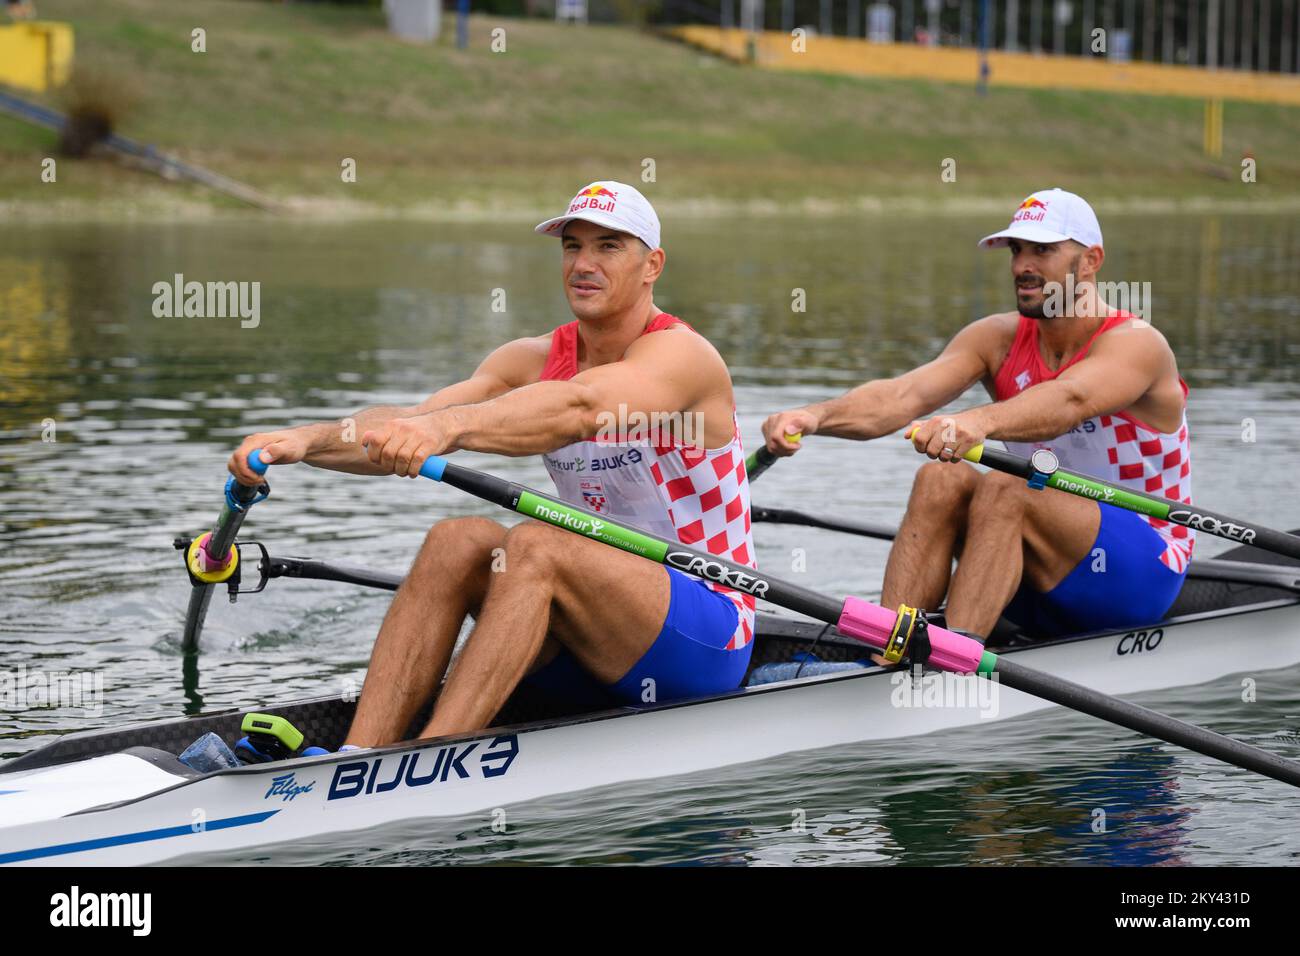 Croatian rowers Martin and Valent Sinkovic during Media day at Jarun Lake before departure on World rowing Championships, in Zagreb, Croatia, on September 15, 2022.The 2022 World rowing Championships will take place 18-25 September, 2022 in Racice, Czech Republic. Photo: Davor Puklavec/PIXSELL  Stock Photo